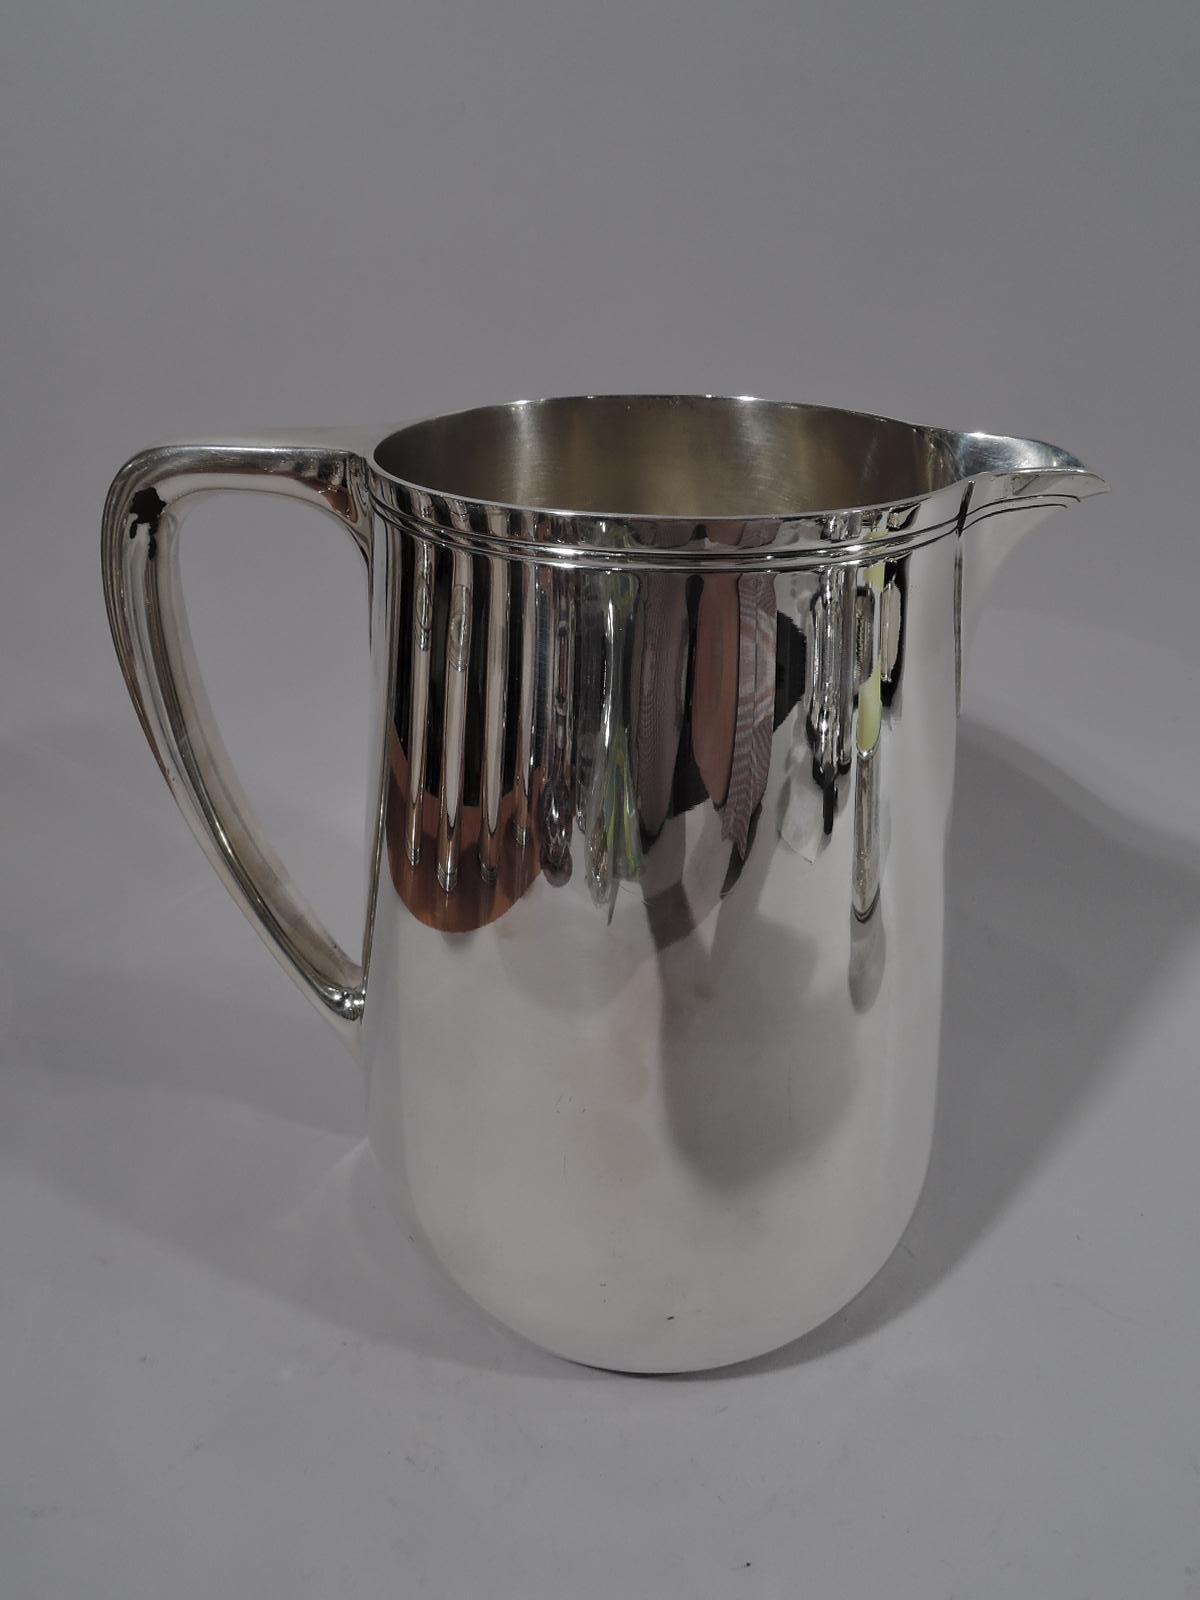 Modern sterling silver water pitcher. Made by Tiffany & Co. in New York. Upward tapering sides, scrolled bracket handle, and v-spout. Spare incised banding near rim. Holds 3 1/2 pints. Fully marked including pattern no. 22343, director’s letter M